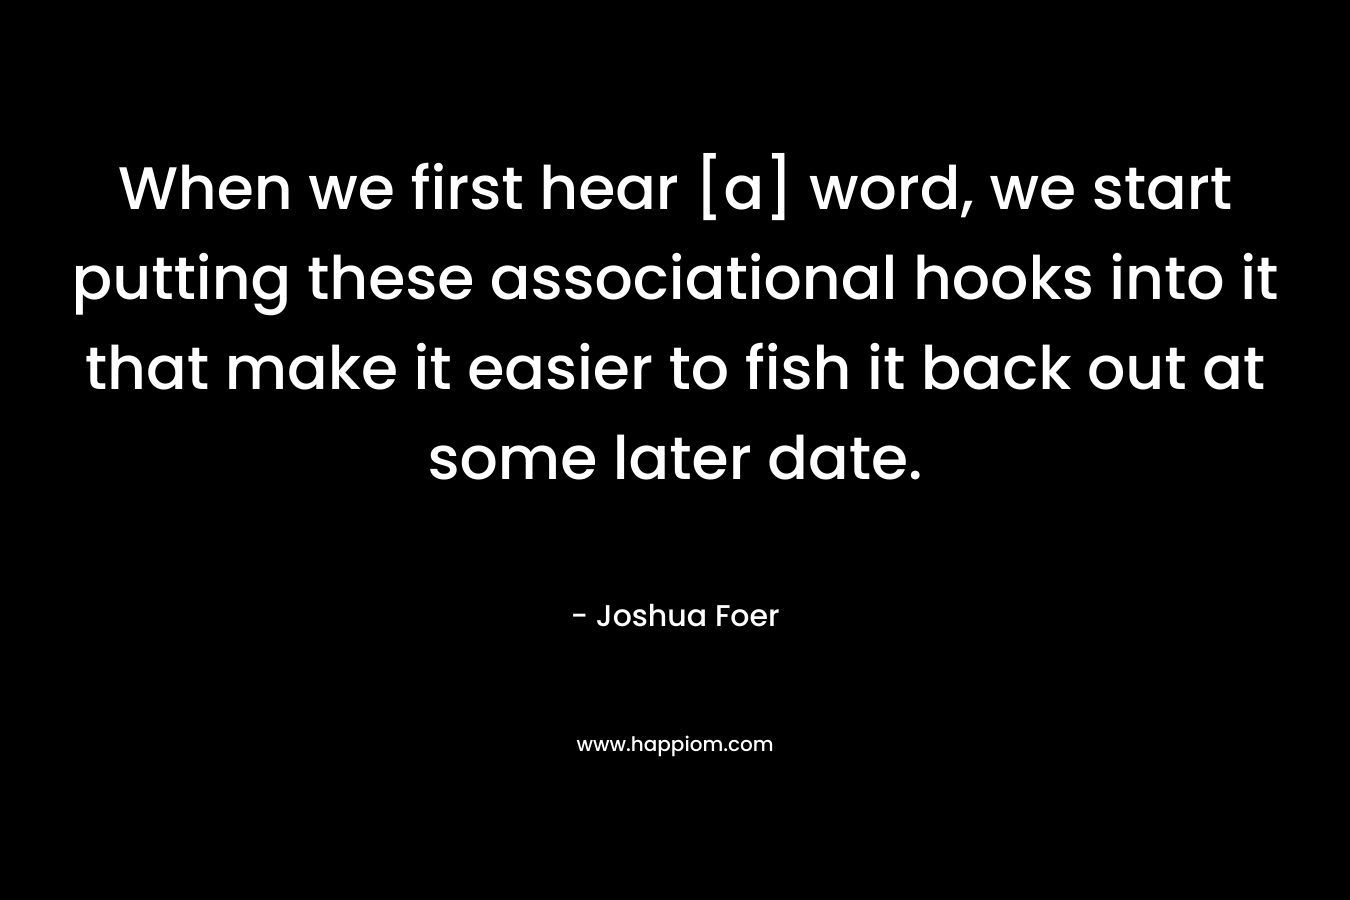 When we first hear [a] word, we start putting these associational hooks into it that make it easier to fish it back out at some later date. – Joshua Foer